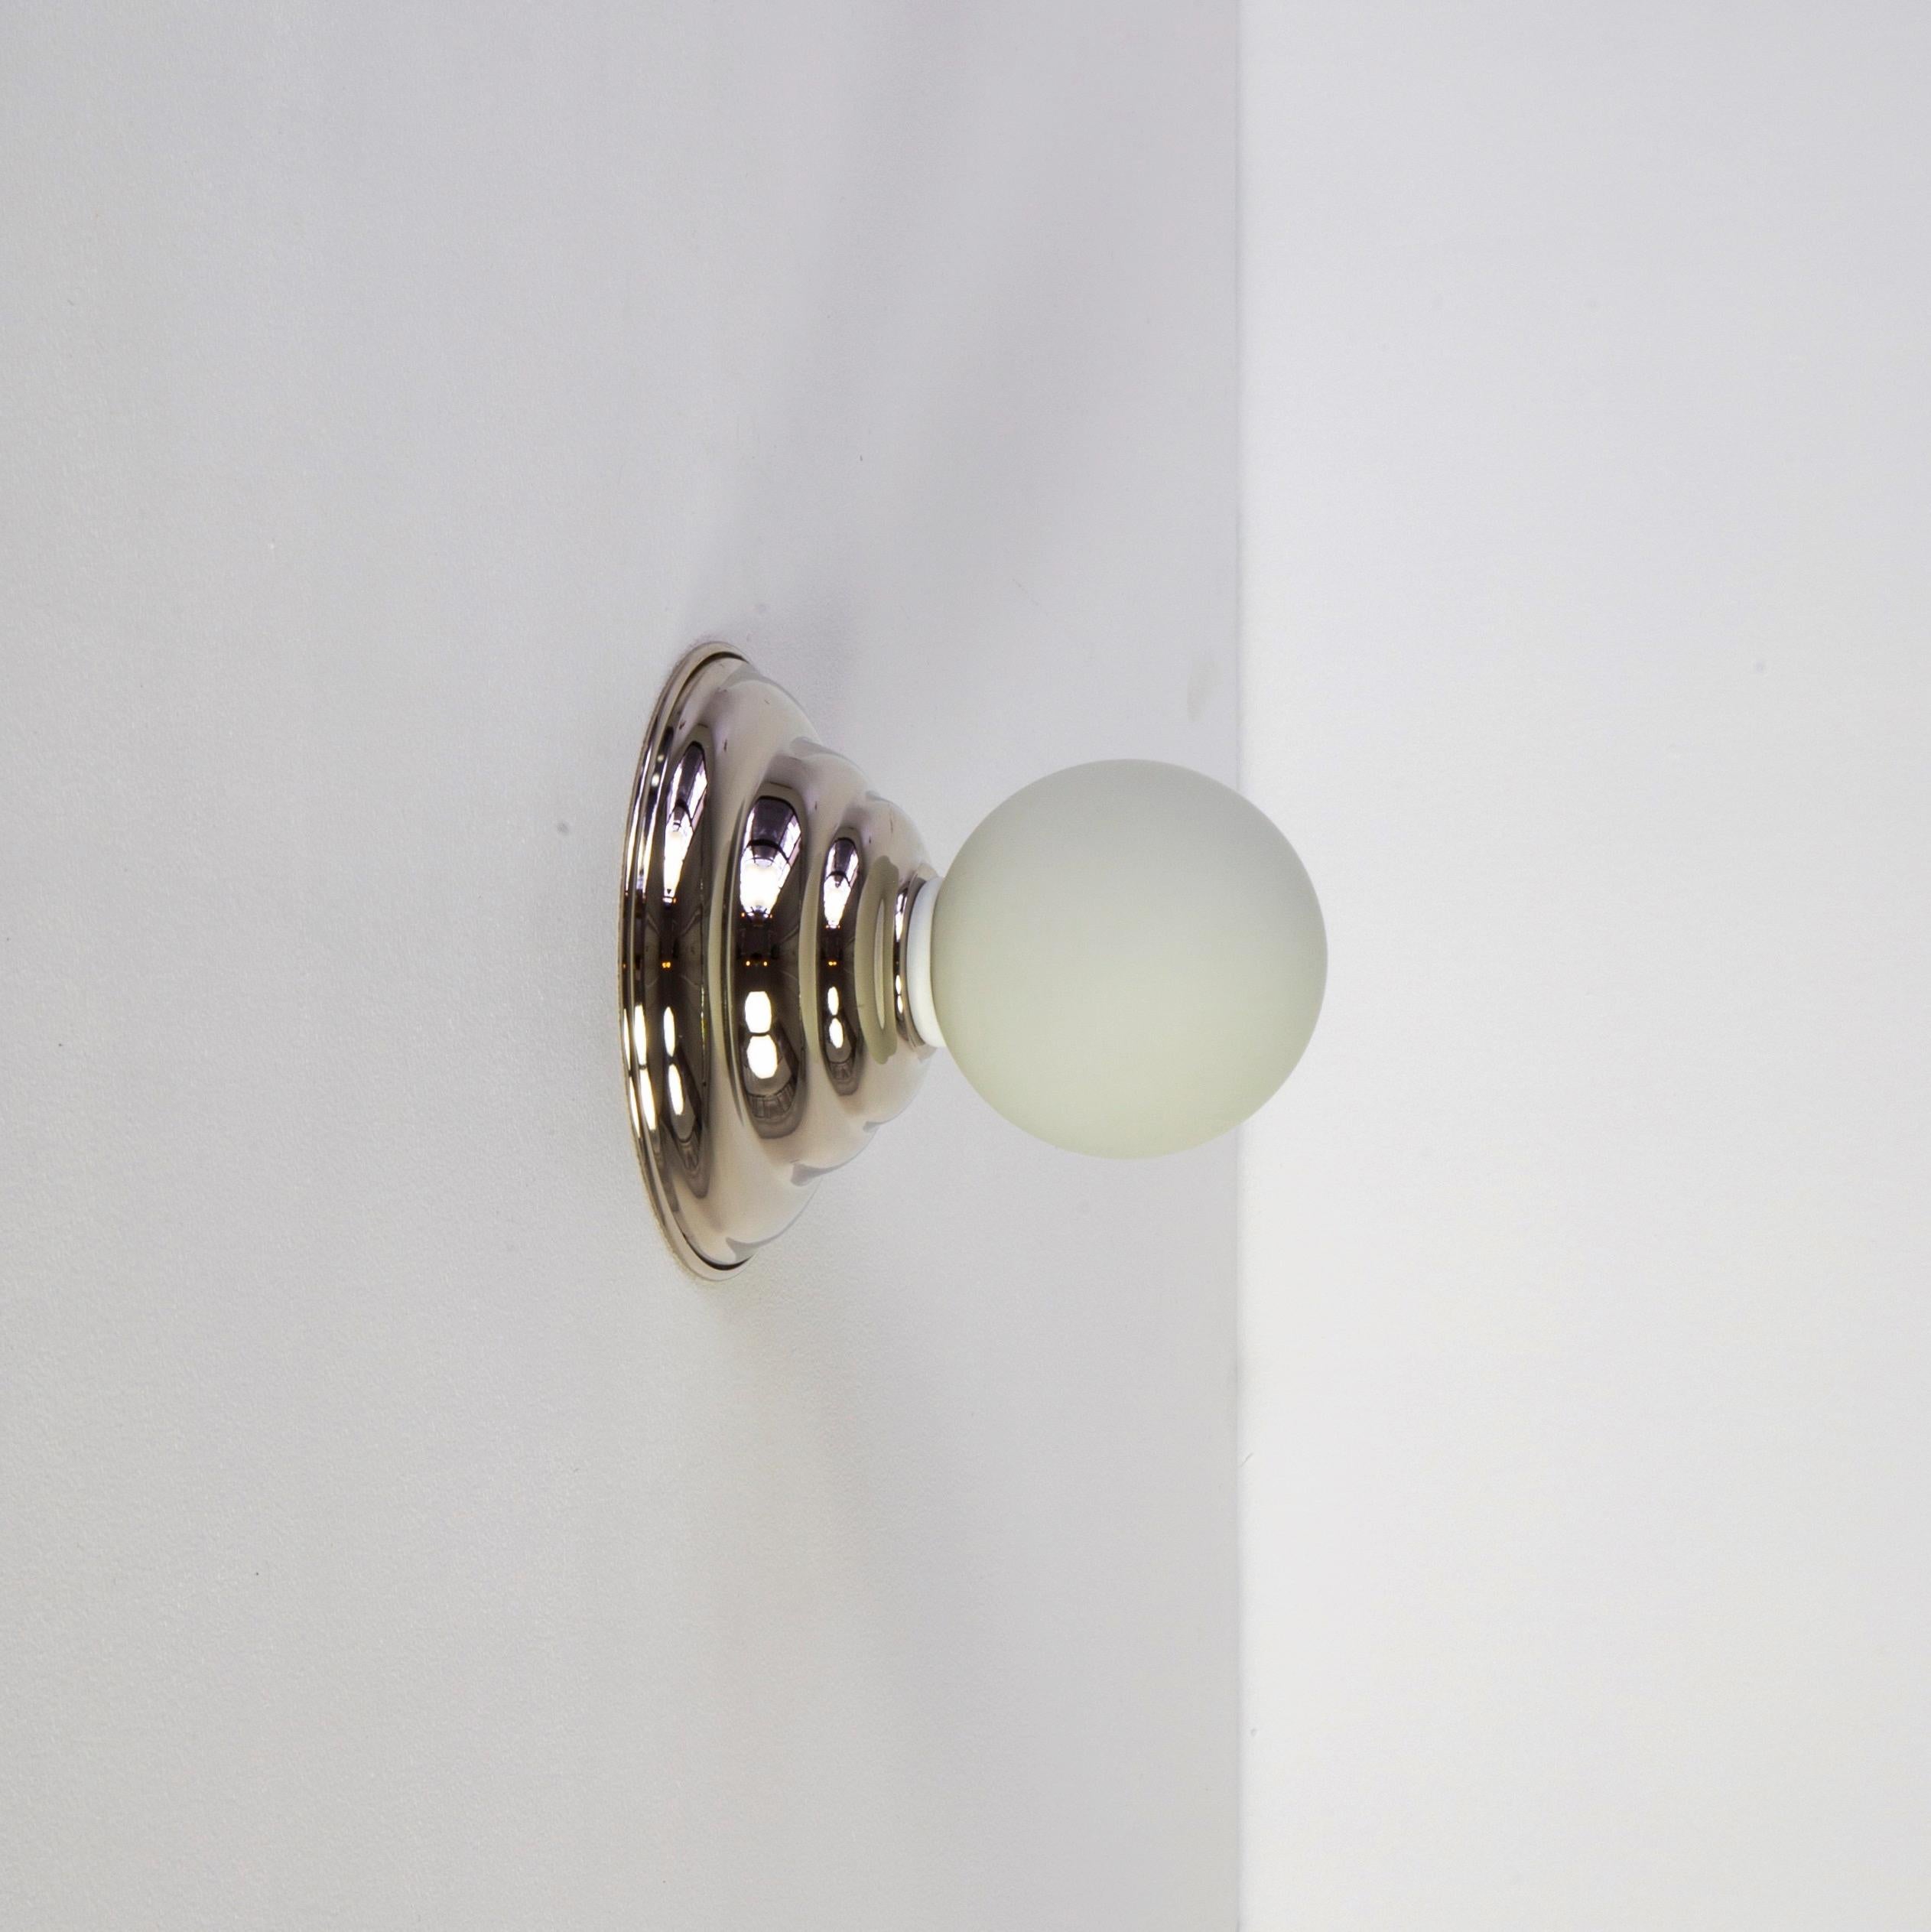 American Hive Sconce by Research.Lighting, Polished Nickel, Made to Order For Sale